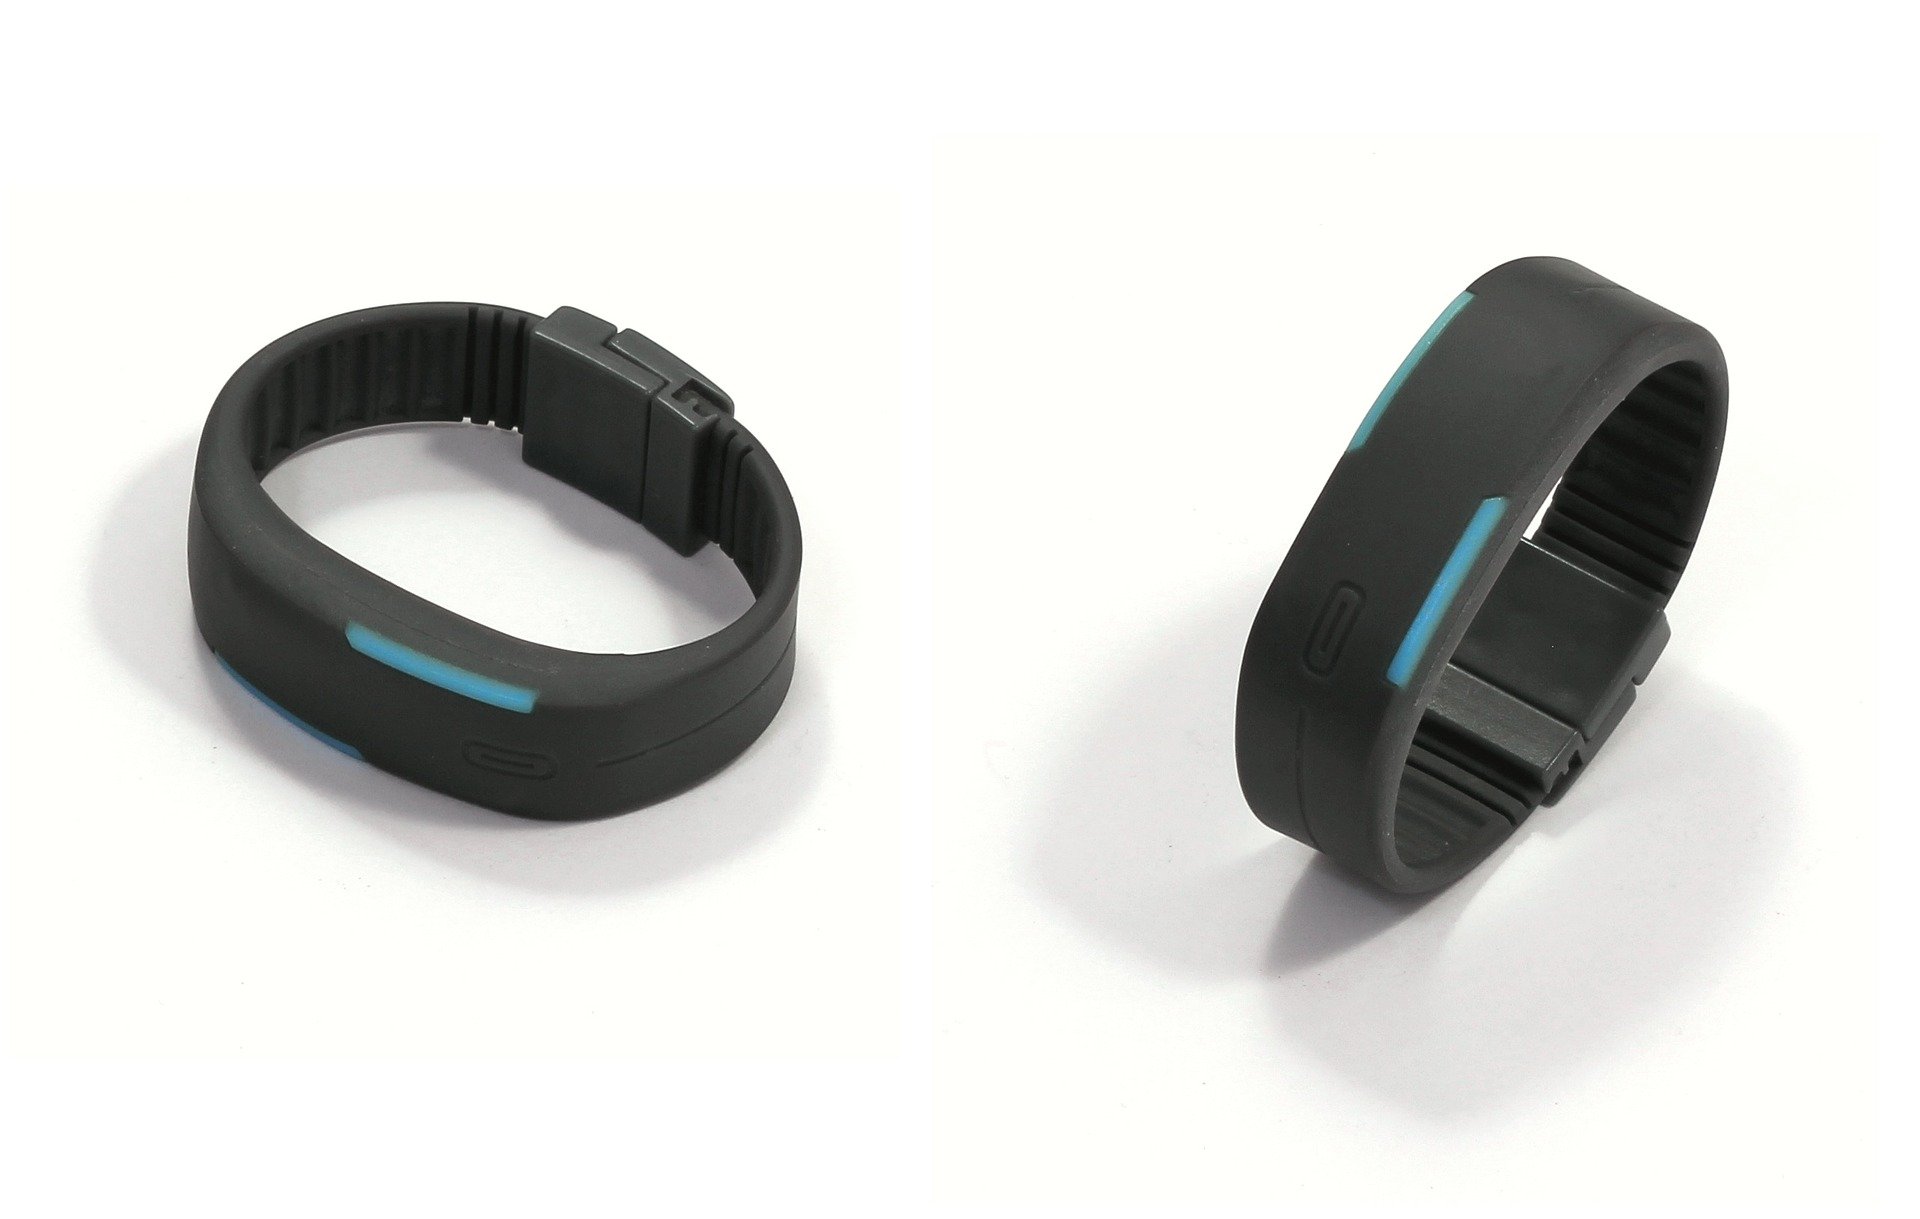 Xiaomi and Mastercard introduced Mi Smart Band 4 NFC with contactless payment function in Russia